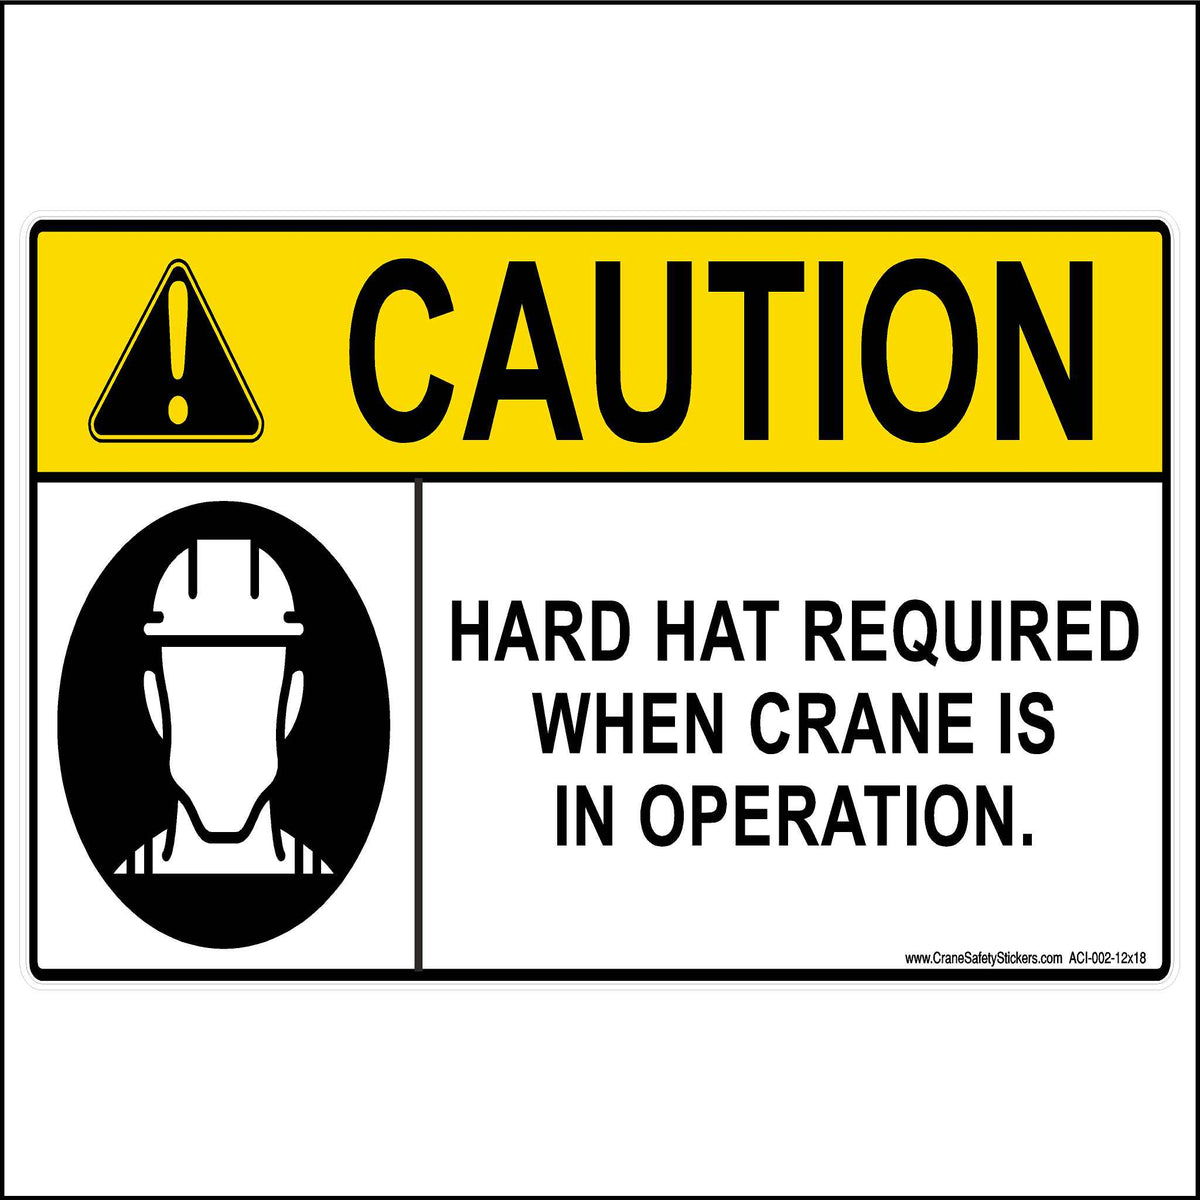 Crane Safety Sign Caution Hard Hat Required When Crane Is In Operation. 12 inches by 18 inches in size.